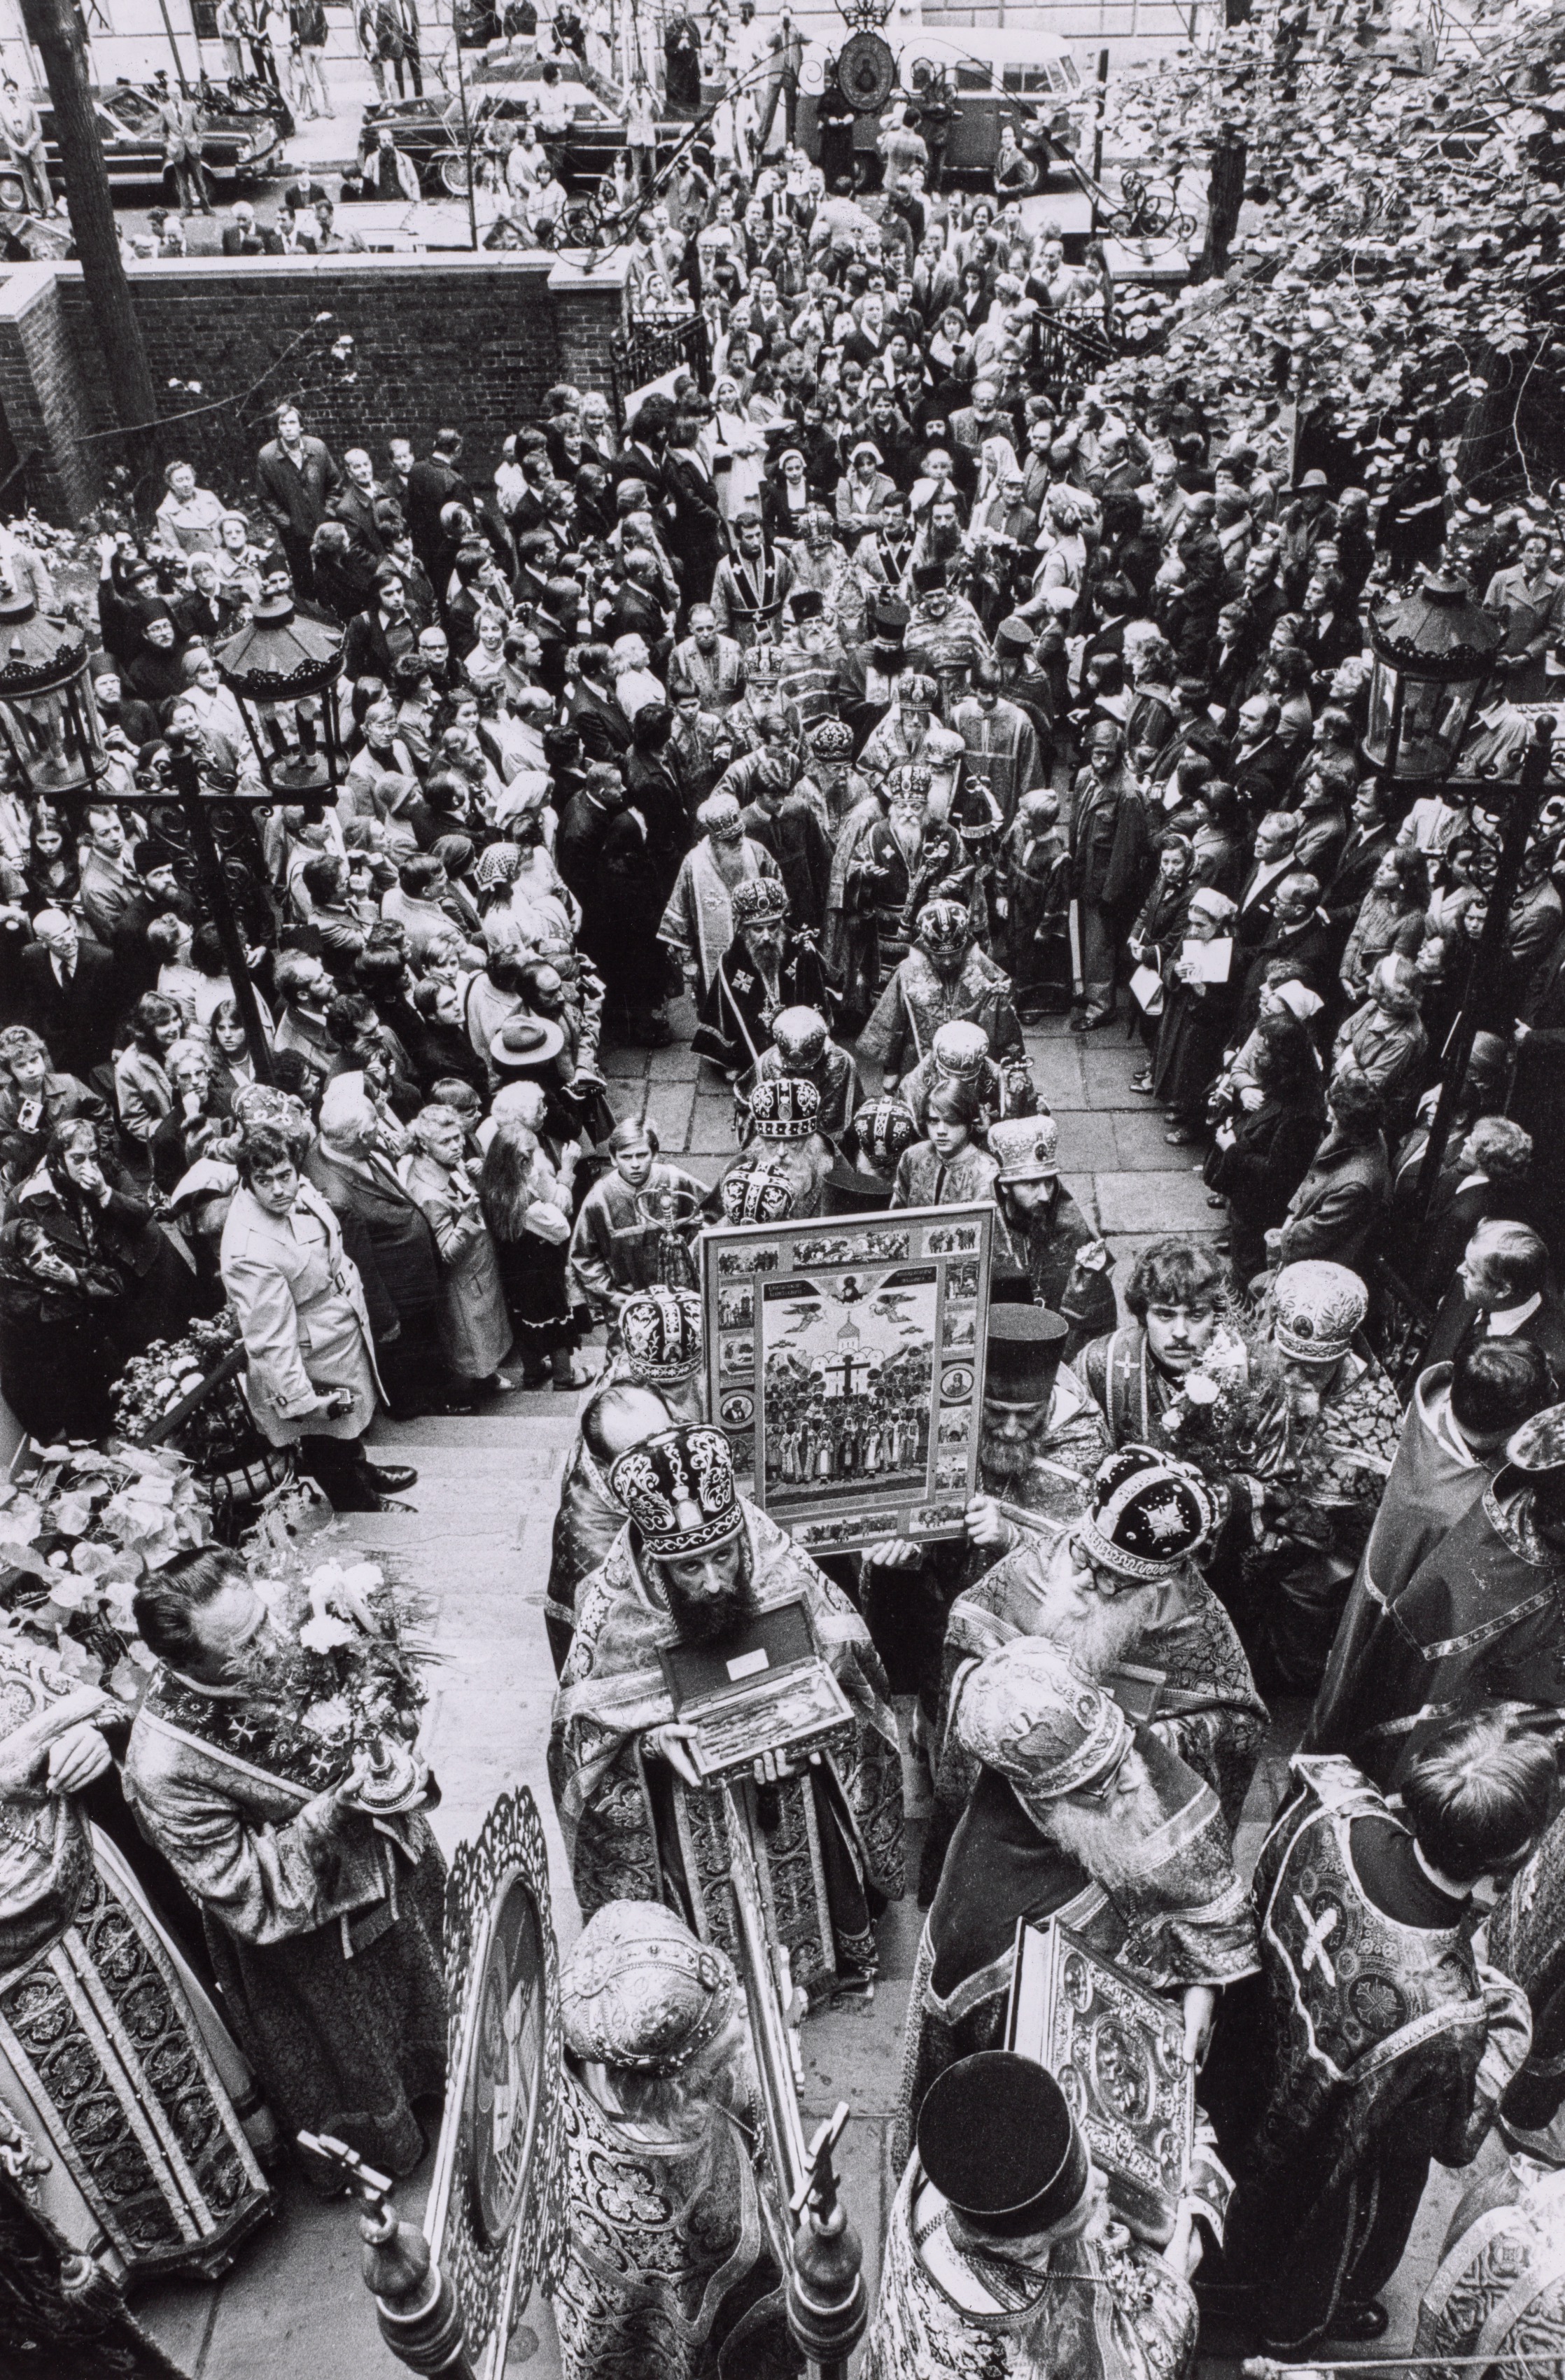 The council of Bishops of the Russian Orthodox Church outside of Russia has proceeded to canonize 8,000 "new martyrs." Among the elect, Czar Nicholas II and his family and the victims of the October Revolution (1917). The ceremonies took place in New York, 1981